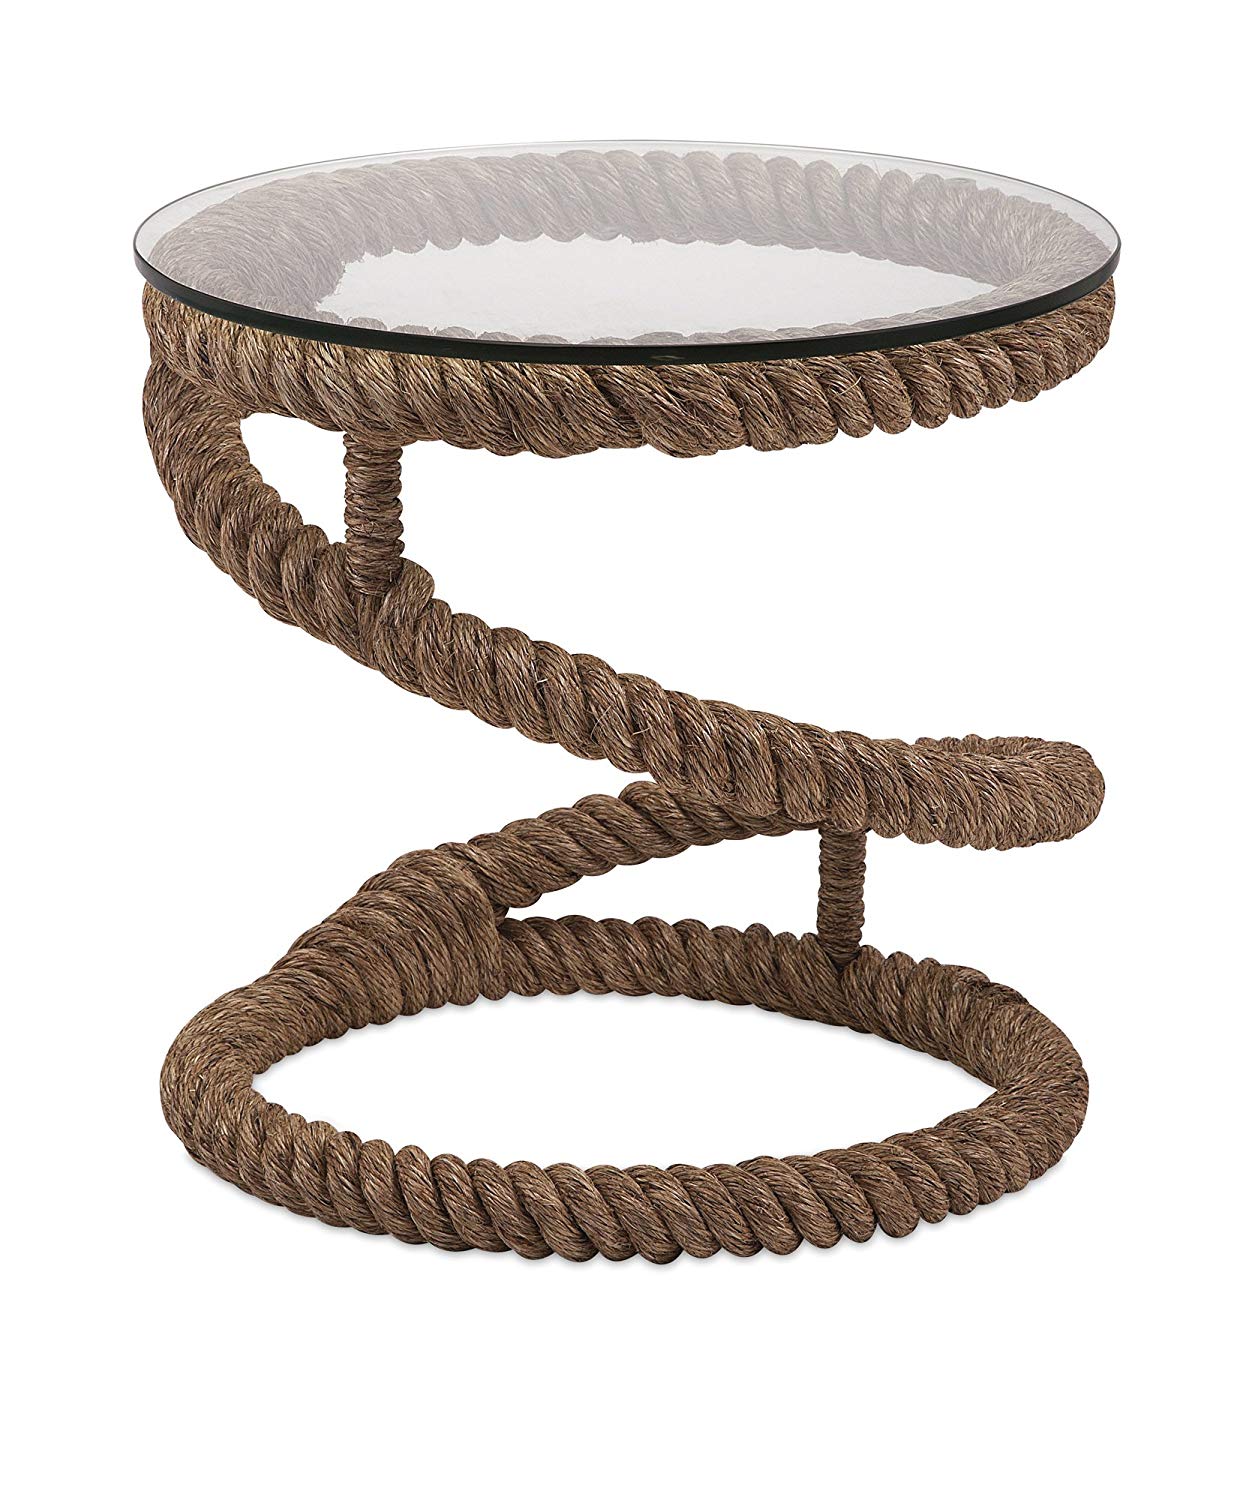 imax bedford jute rope accent table eiyl home kitchen target cocktail vintage wood outdoor living patio furniture crystal bedside lamps clearance tables diy sliding door battery